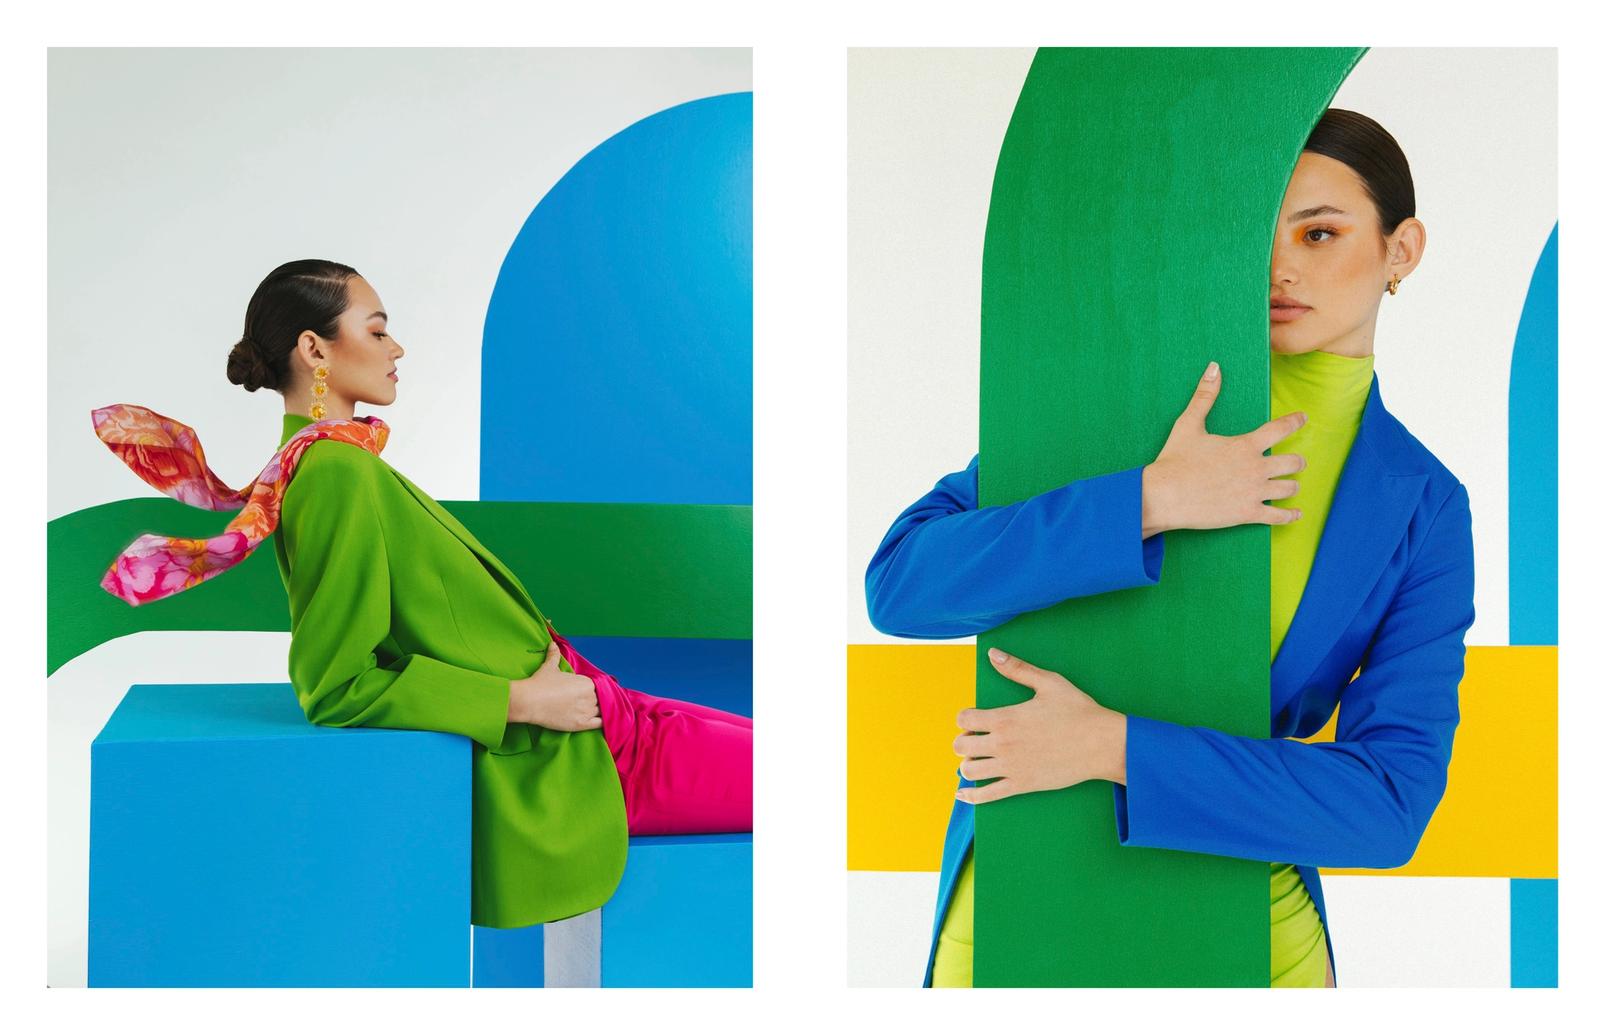 Playing with shapes and bold colors, comes a sexy whimsical take on modern fashion editorial. CREW NAMES AND INSTA TAGS  Photographer: Alexa Merico @lexeye_ Art Direction/Styling: Mackenzie Meyer @macphotographyxx Makeup: Melis Cifcili @meliscifcili Hair: Jovani Fonseca @sstaackz Model: Caroline Churchill @carolinechurchill Model: Mattea Dordevic @matteadordevic Studio: @thewarehouse_miami Set Assistant: Dara Weinstein @dara.weinstein Arches: @dreamerseventsllc